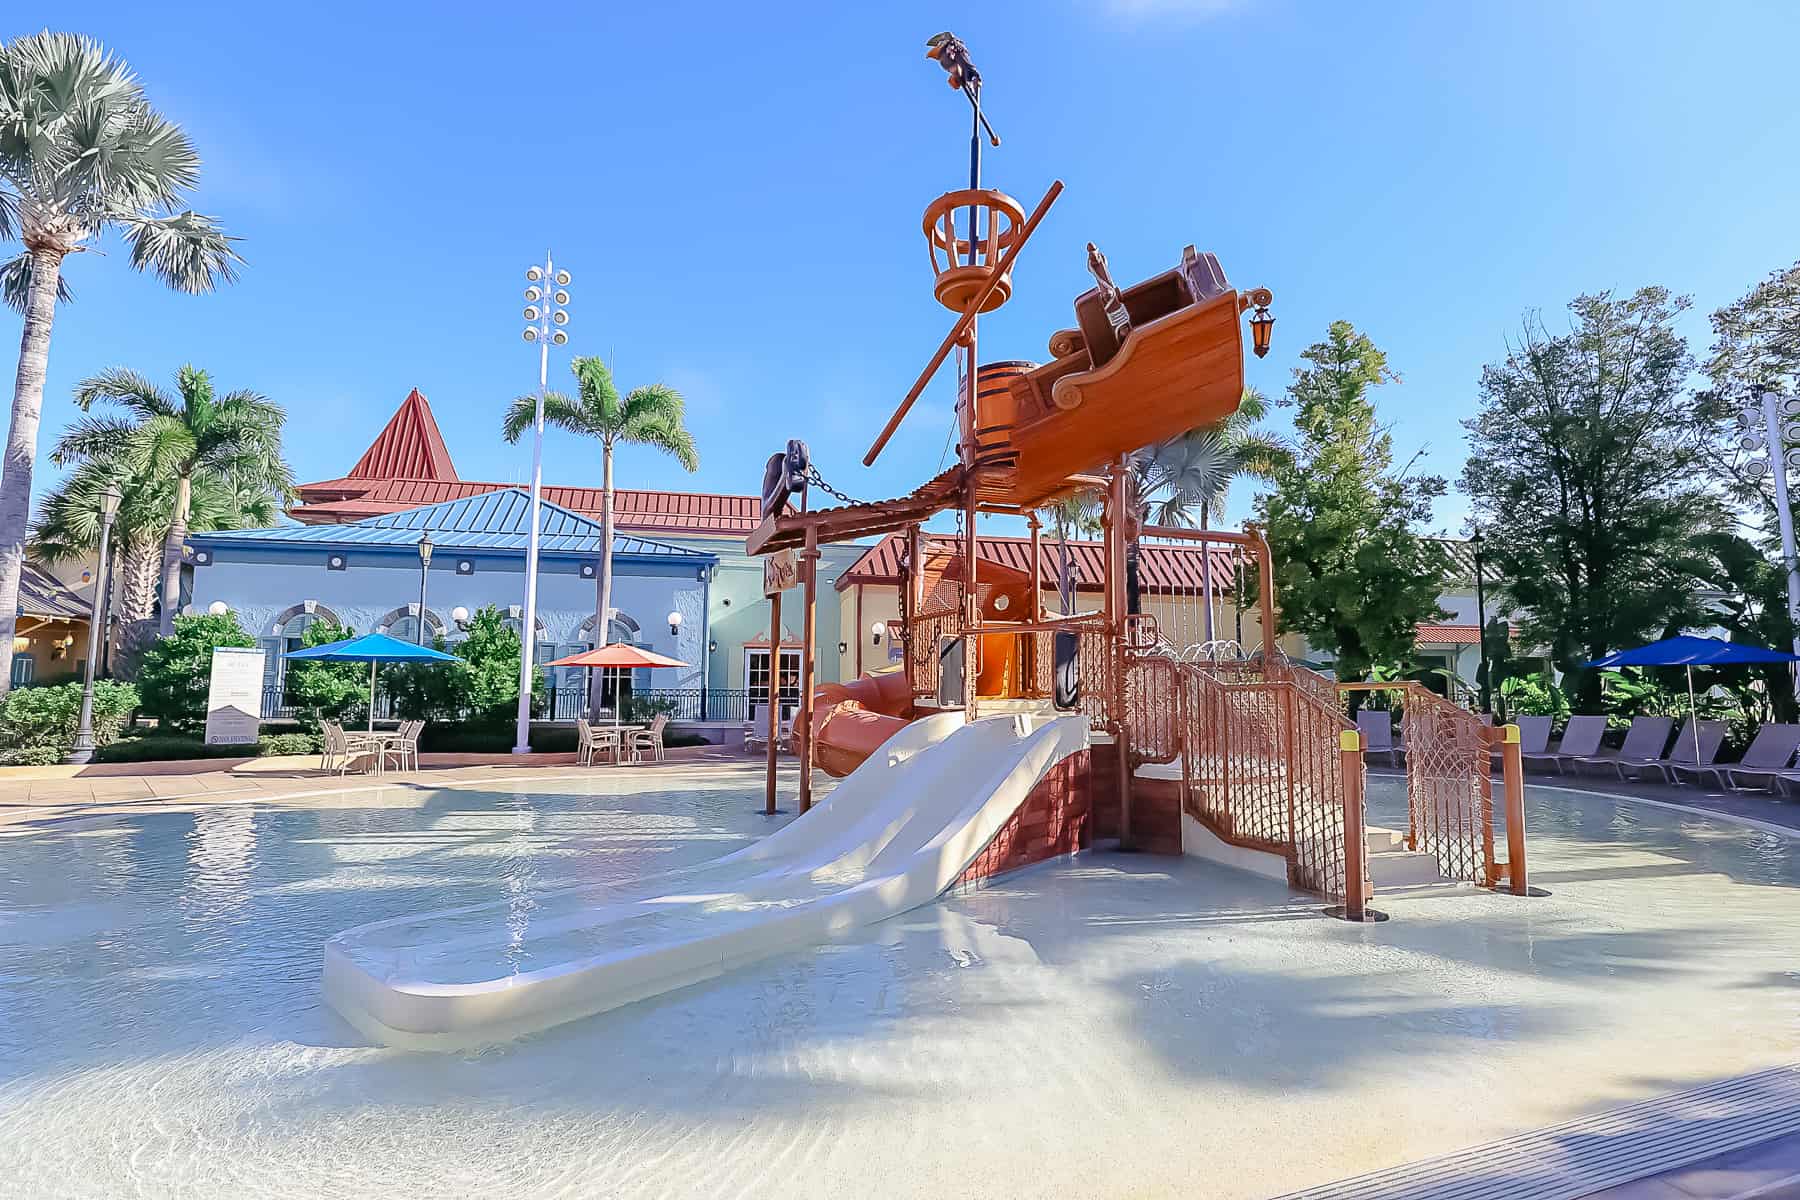 aquatic play area at Caribbean Beach has slides for younger children 